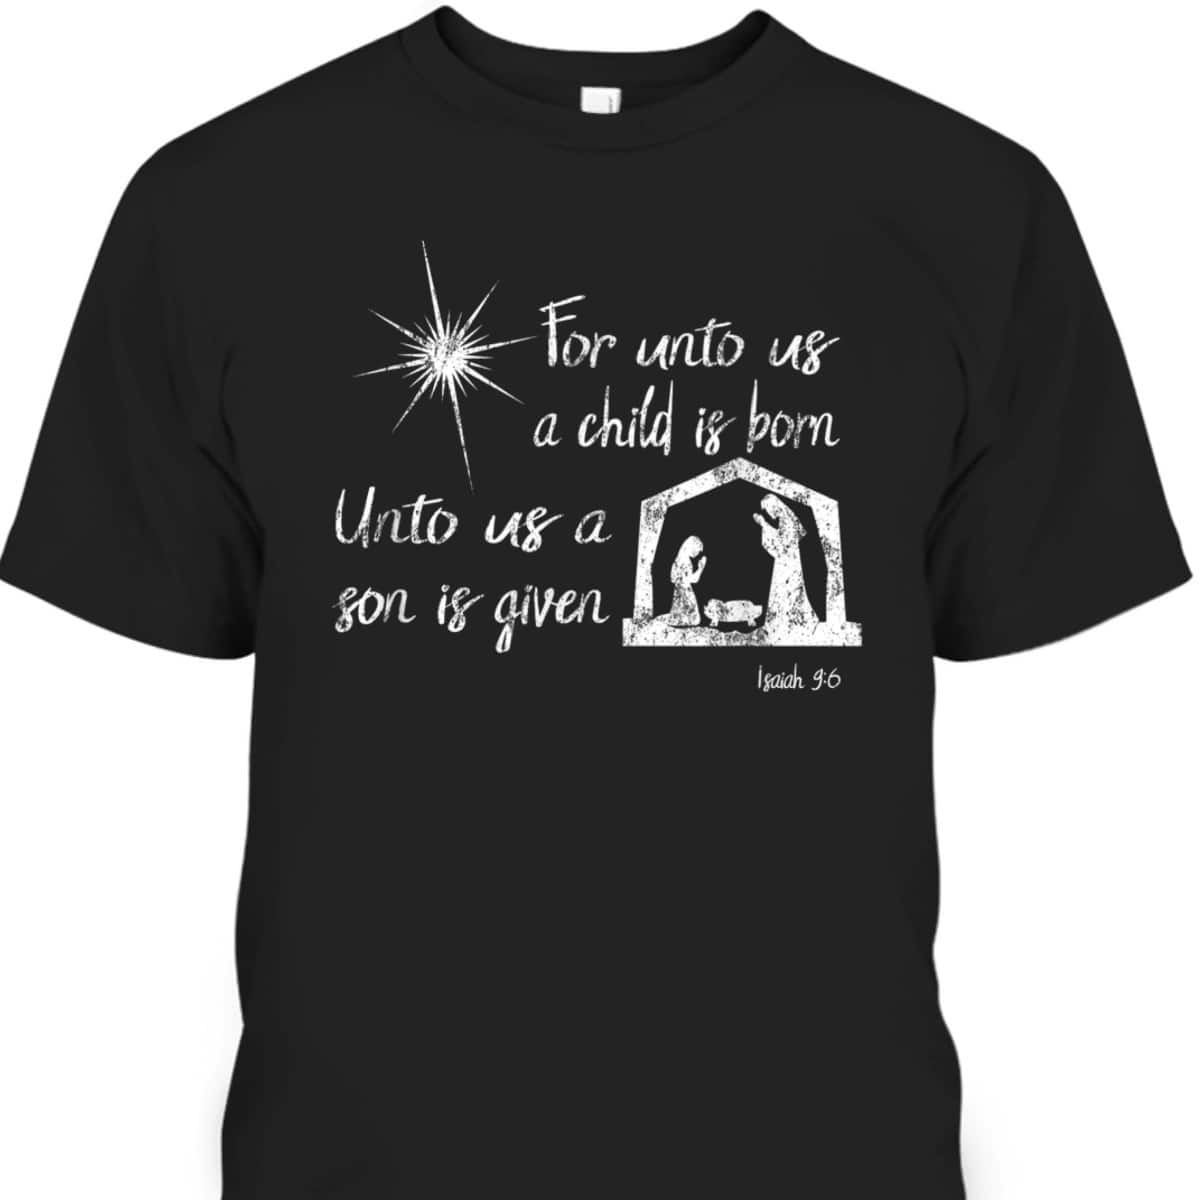 For Unto Us A Child Is Born Isaiah 96 For Christmas T-Shirt